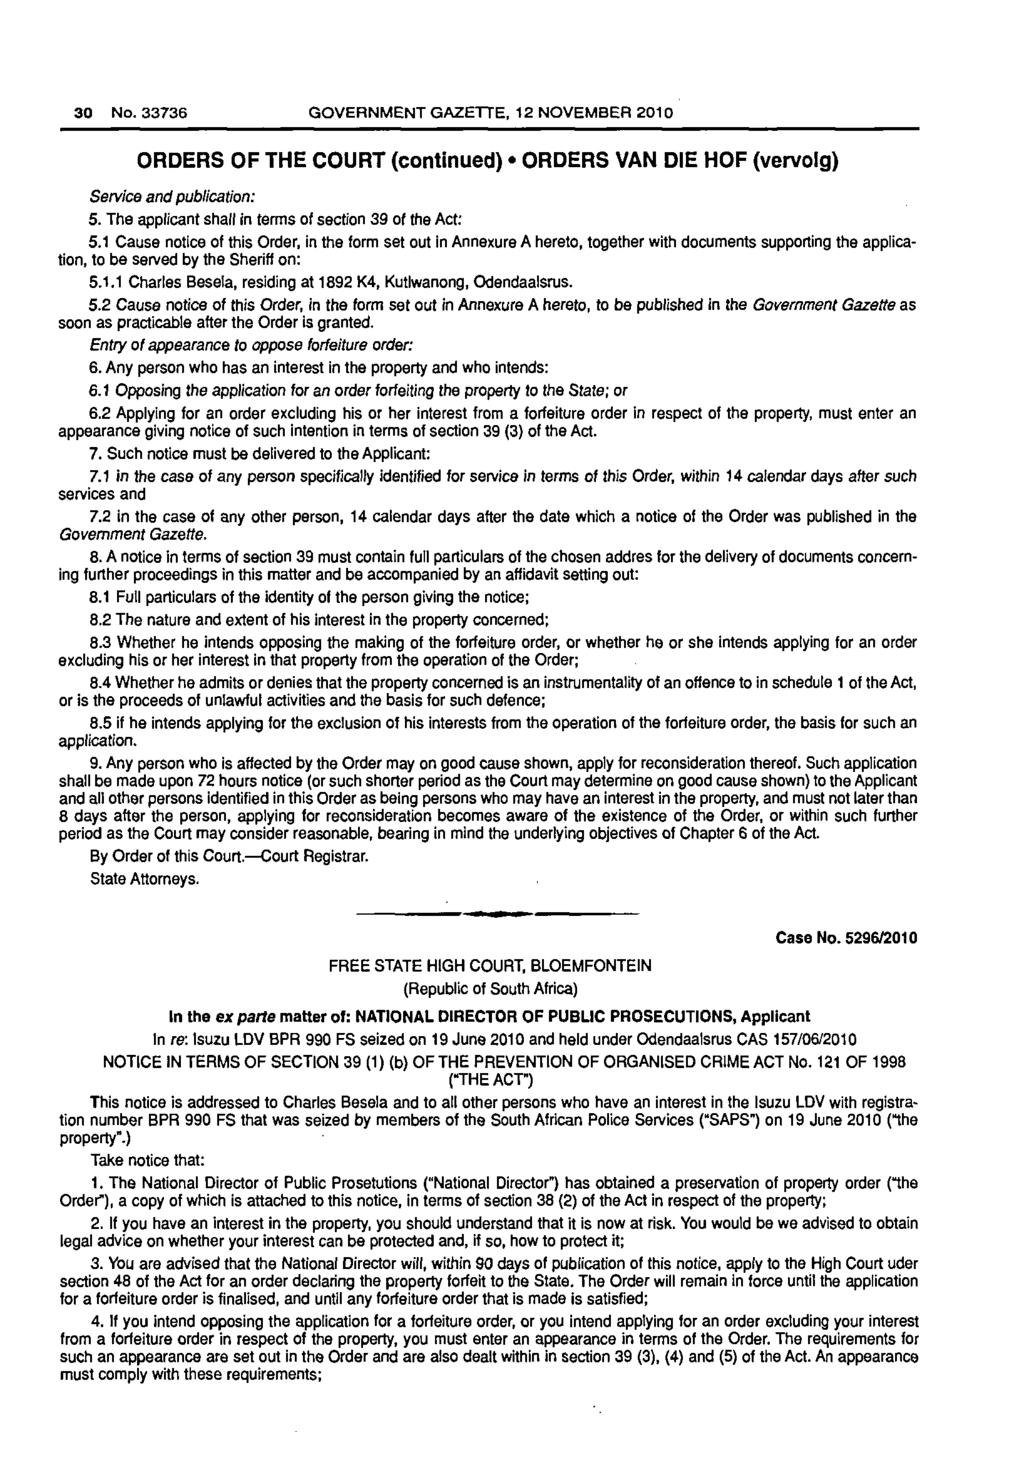 30 No. 33736 GOVERNMENT GAZETTE, 12 NOVEMBER 2010 ORDERS OF THE COURT (continued) ORDERS VAN DIE HOF (vervolg) Service and publication: 5. The applicant shall in terms of section 39 of the Act: 5.